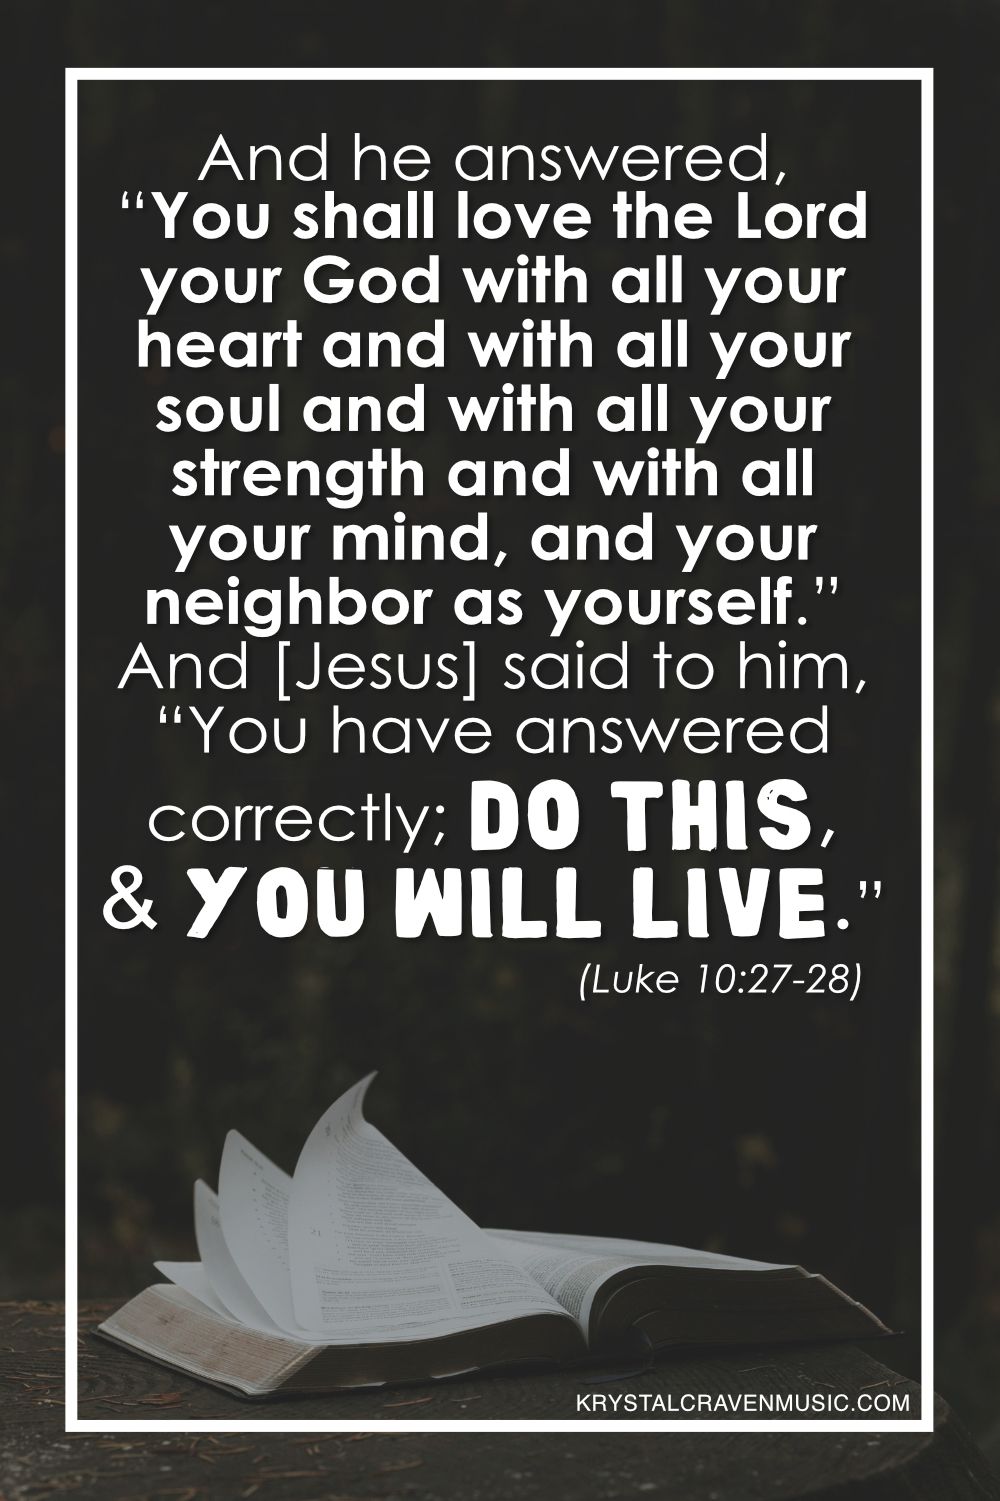 The text from Luke 10:27-28 "And he answered, “You shall love the Lord your God with all your heart and with all your soul and with all your strength and with all your mind, and your neighbor as yourself.” And he said to him, “You have answered correctly; do this, and you will live.”" in a white font above a Bible that is opened and has its pages being flipped by the wind.